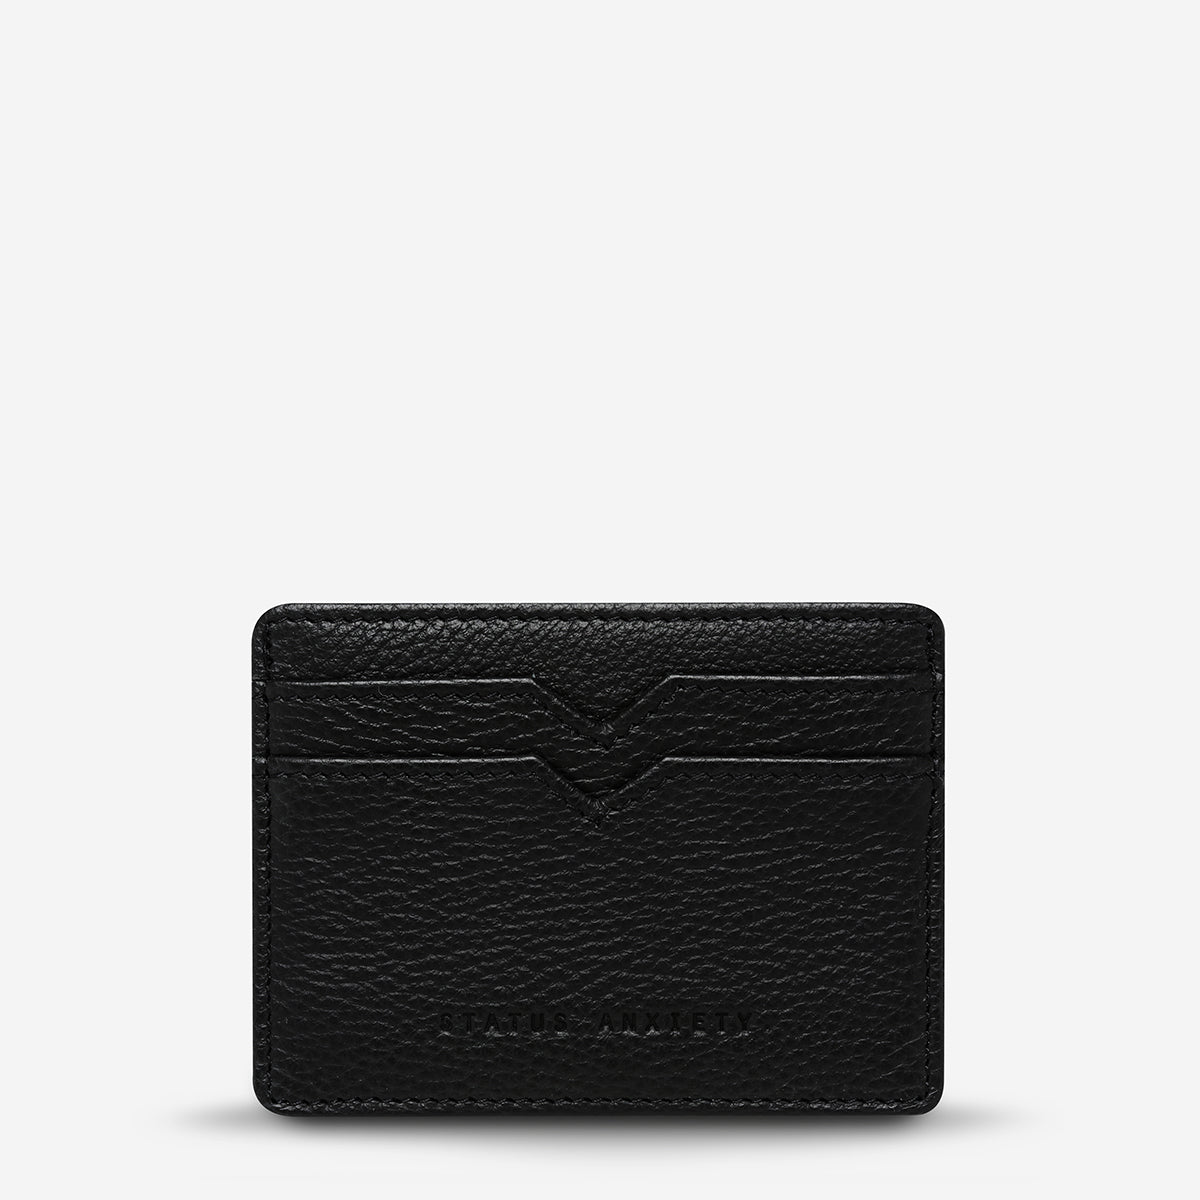 Status Anxiety Together For Now Women's Leather Card Wallet Black